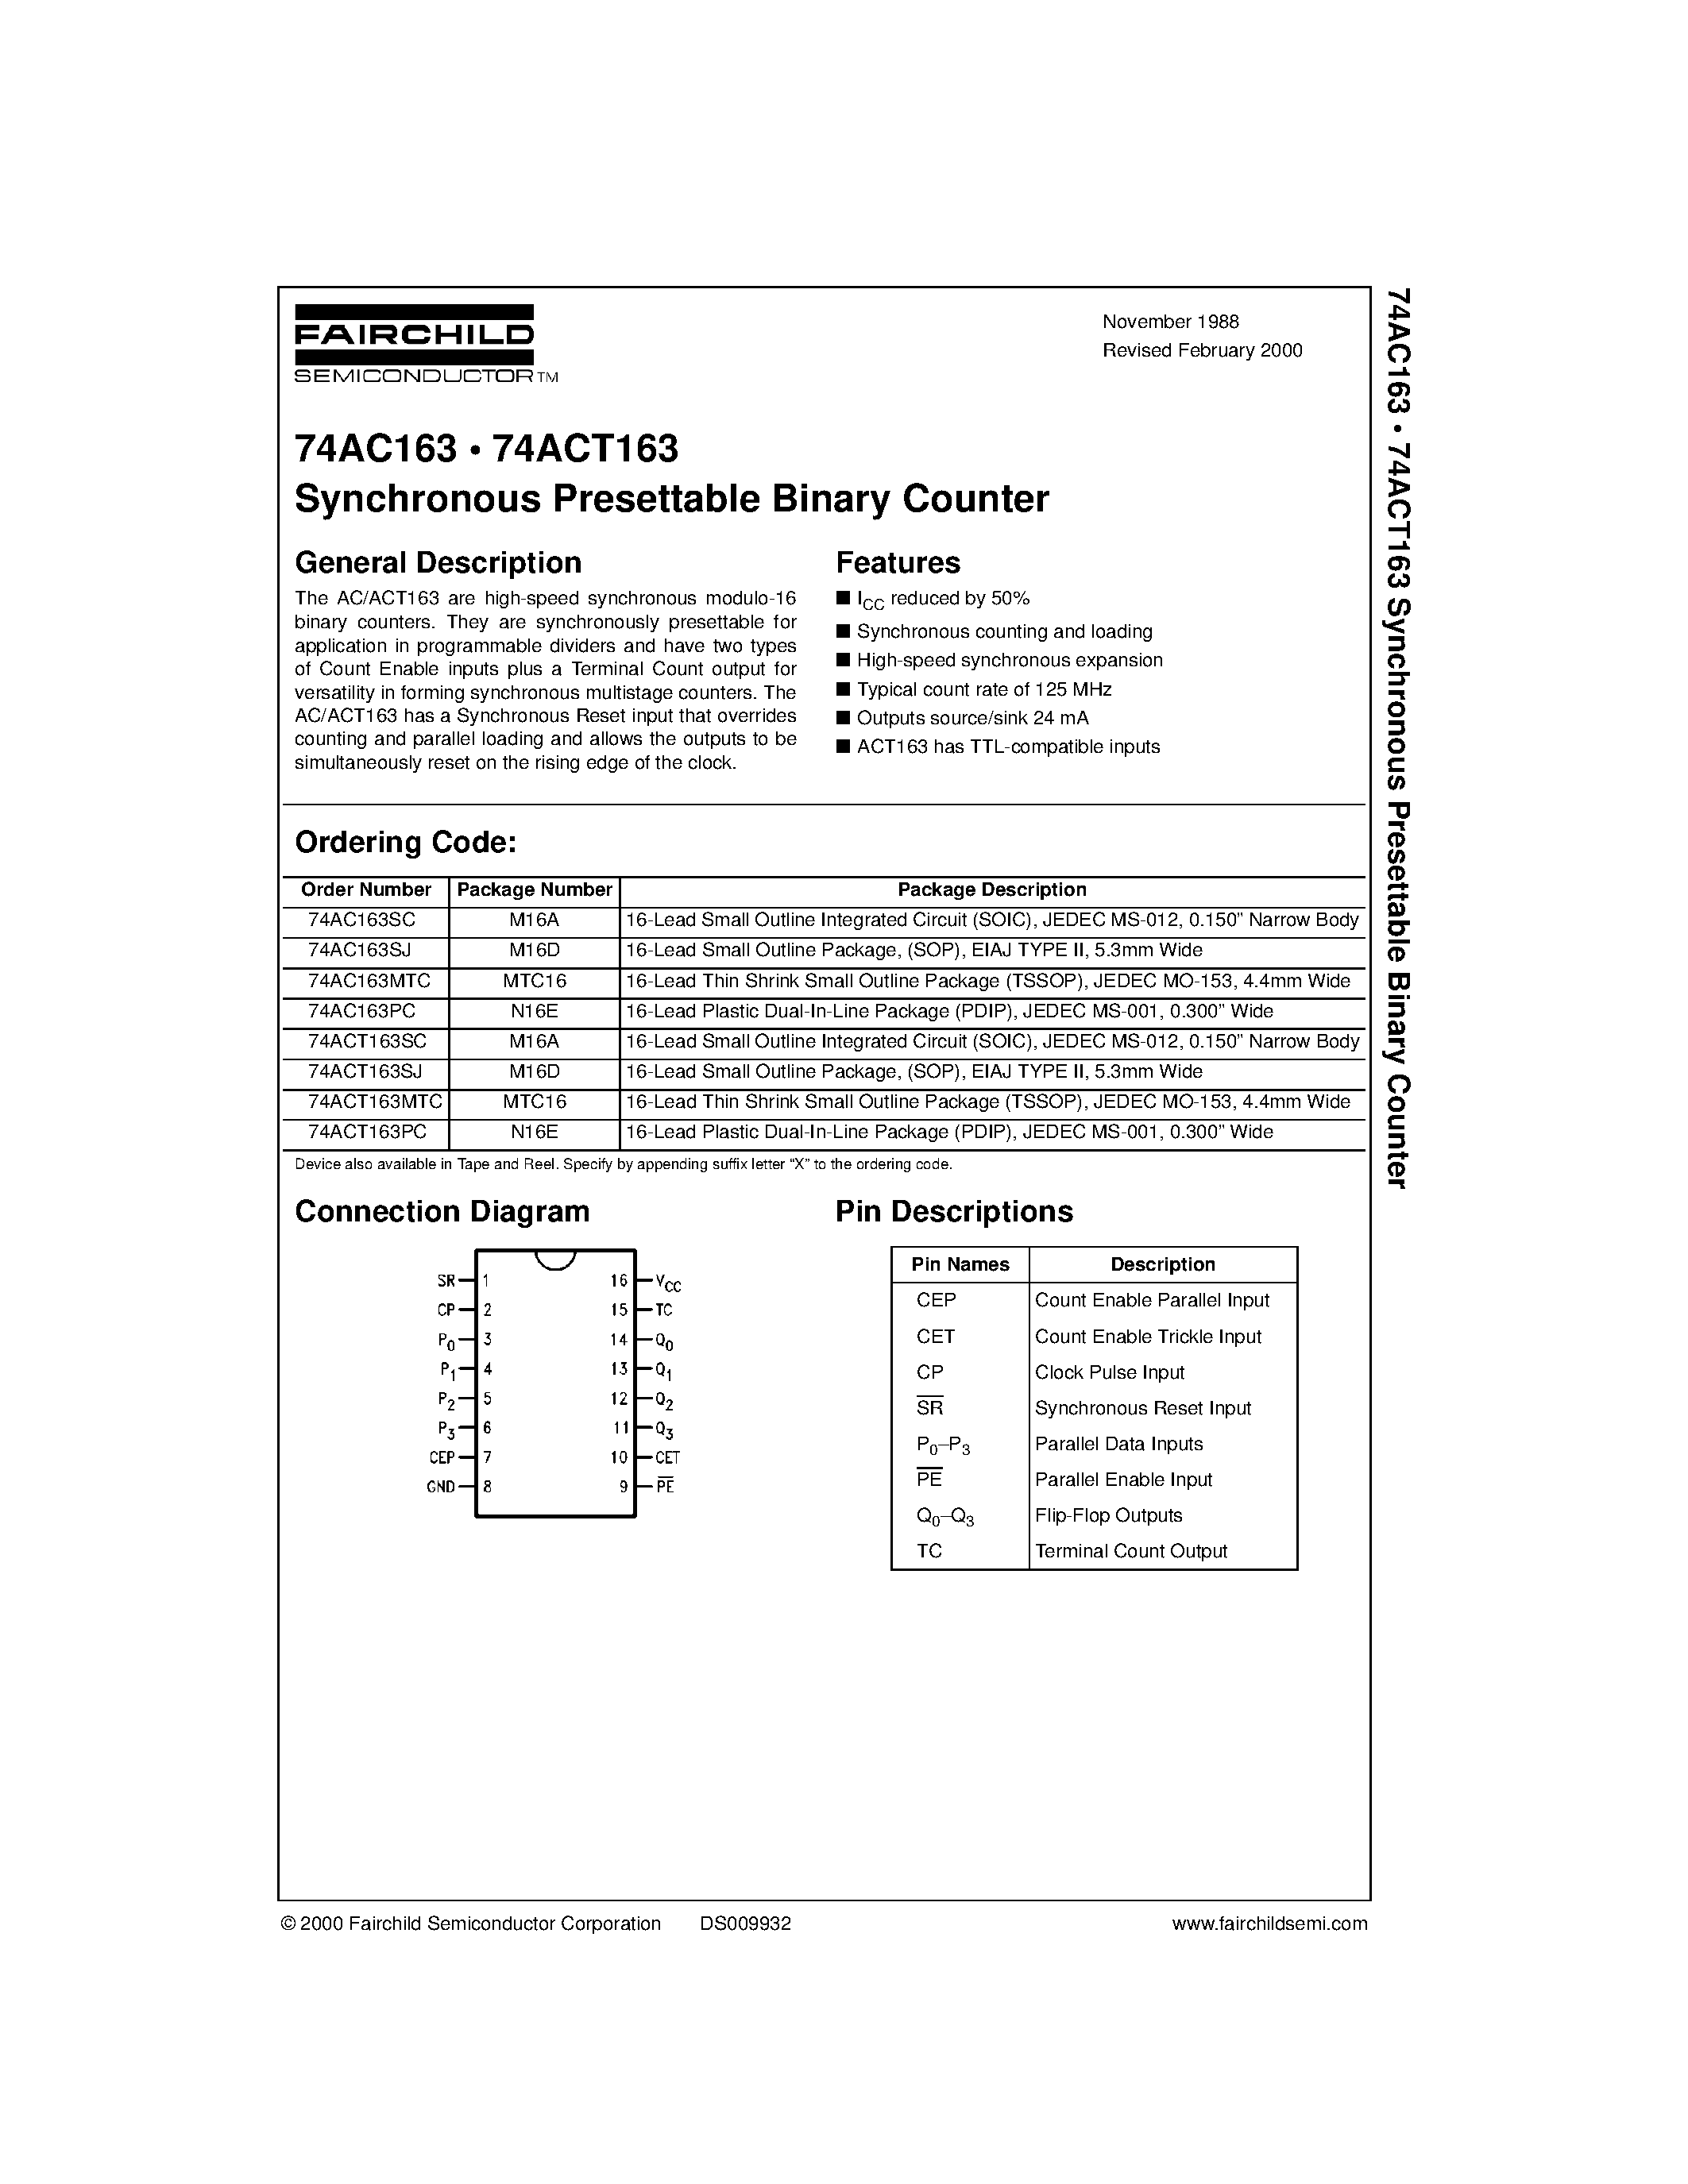 Datasheet 74AC163SJ - Synchronous Presettable Binary Counter page 1